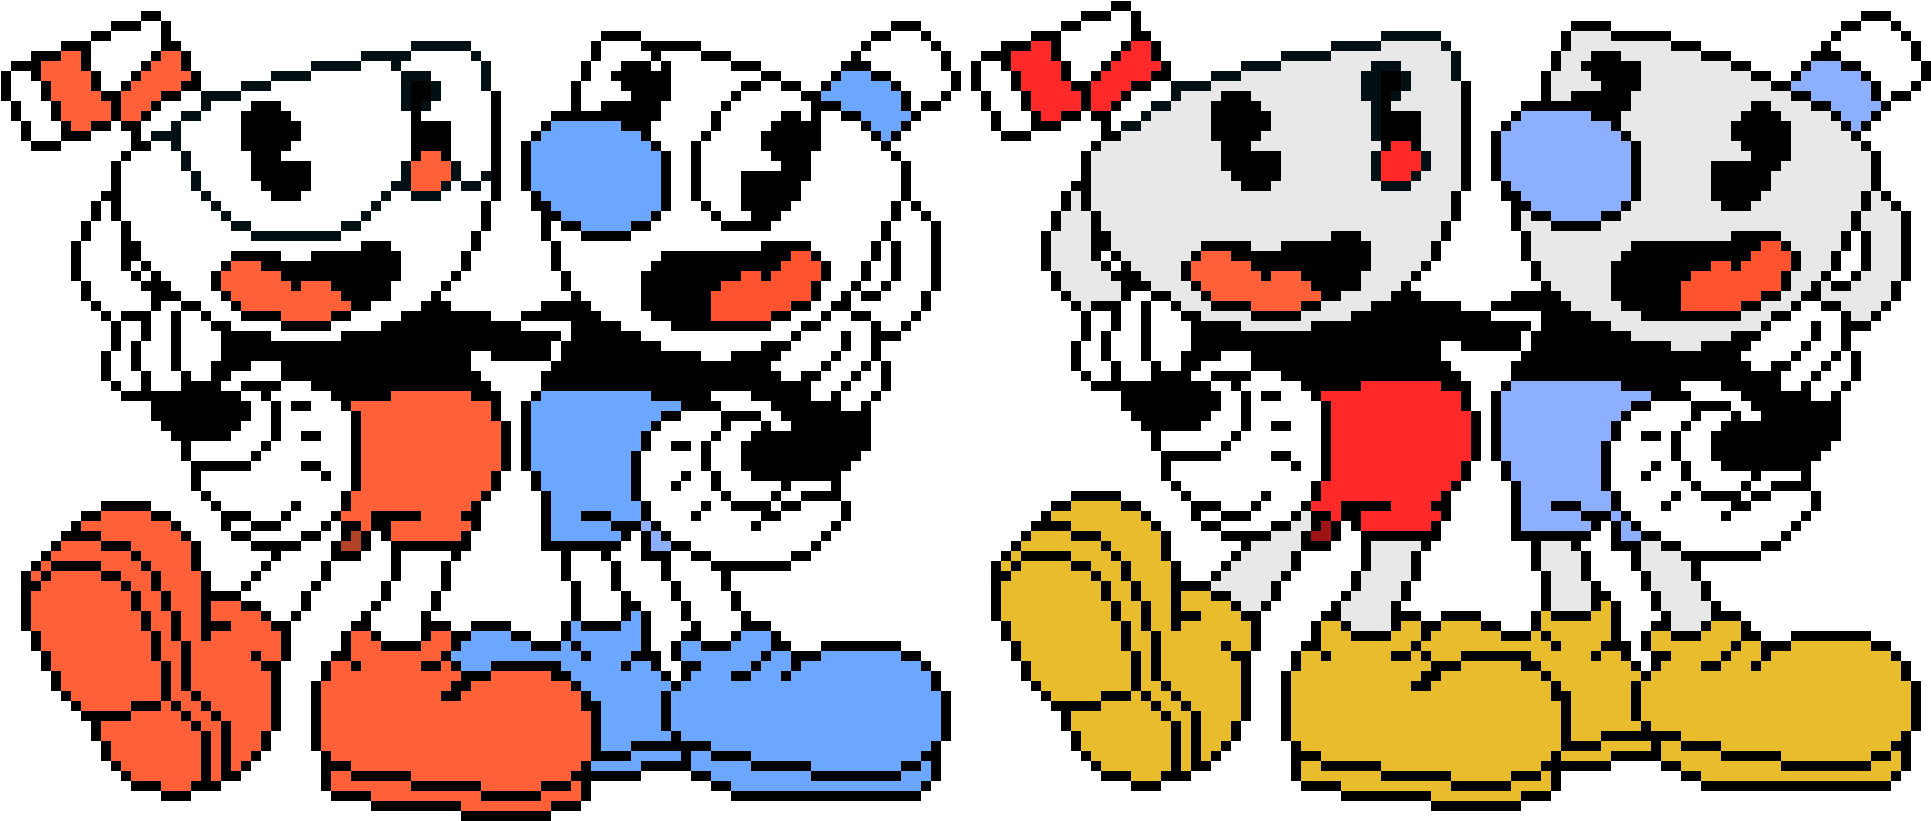 A Pixel Art Of Two Cartoon Characters